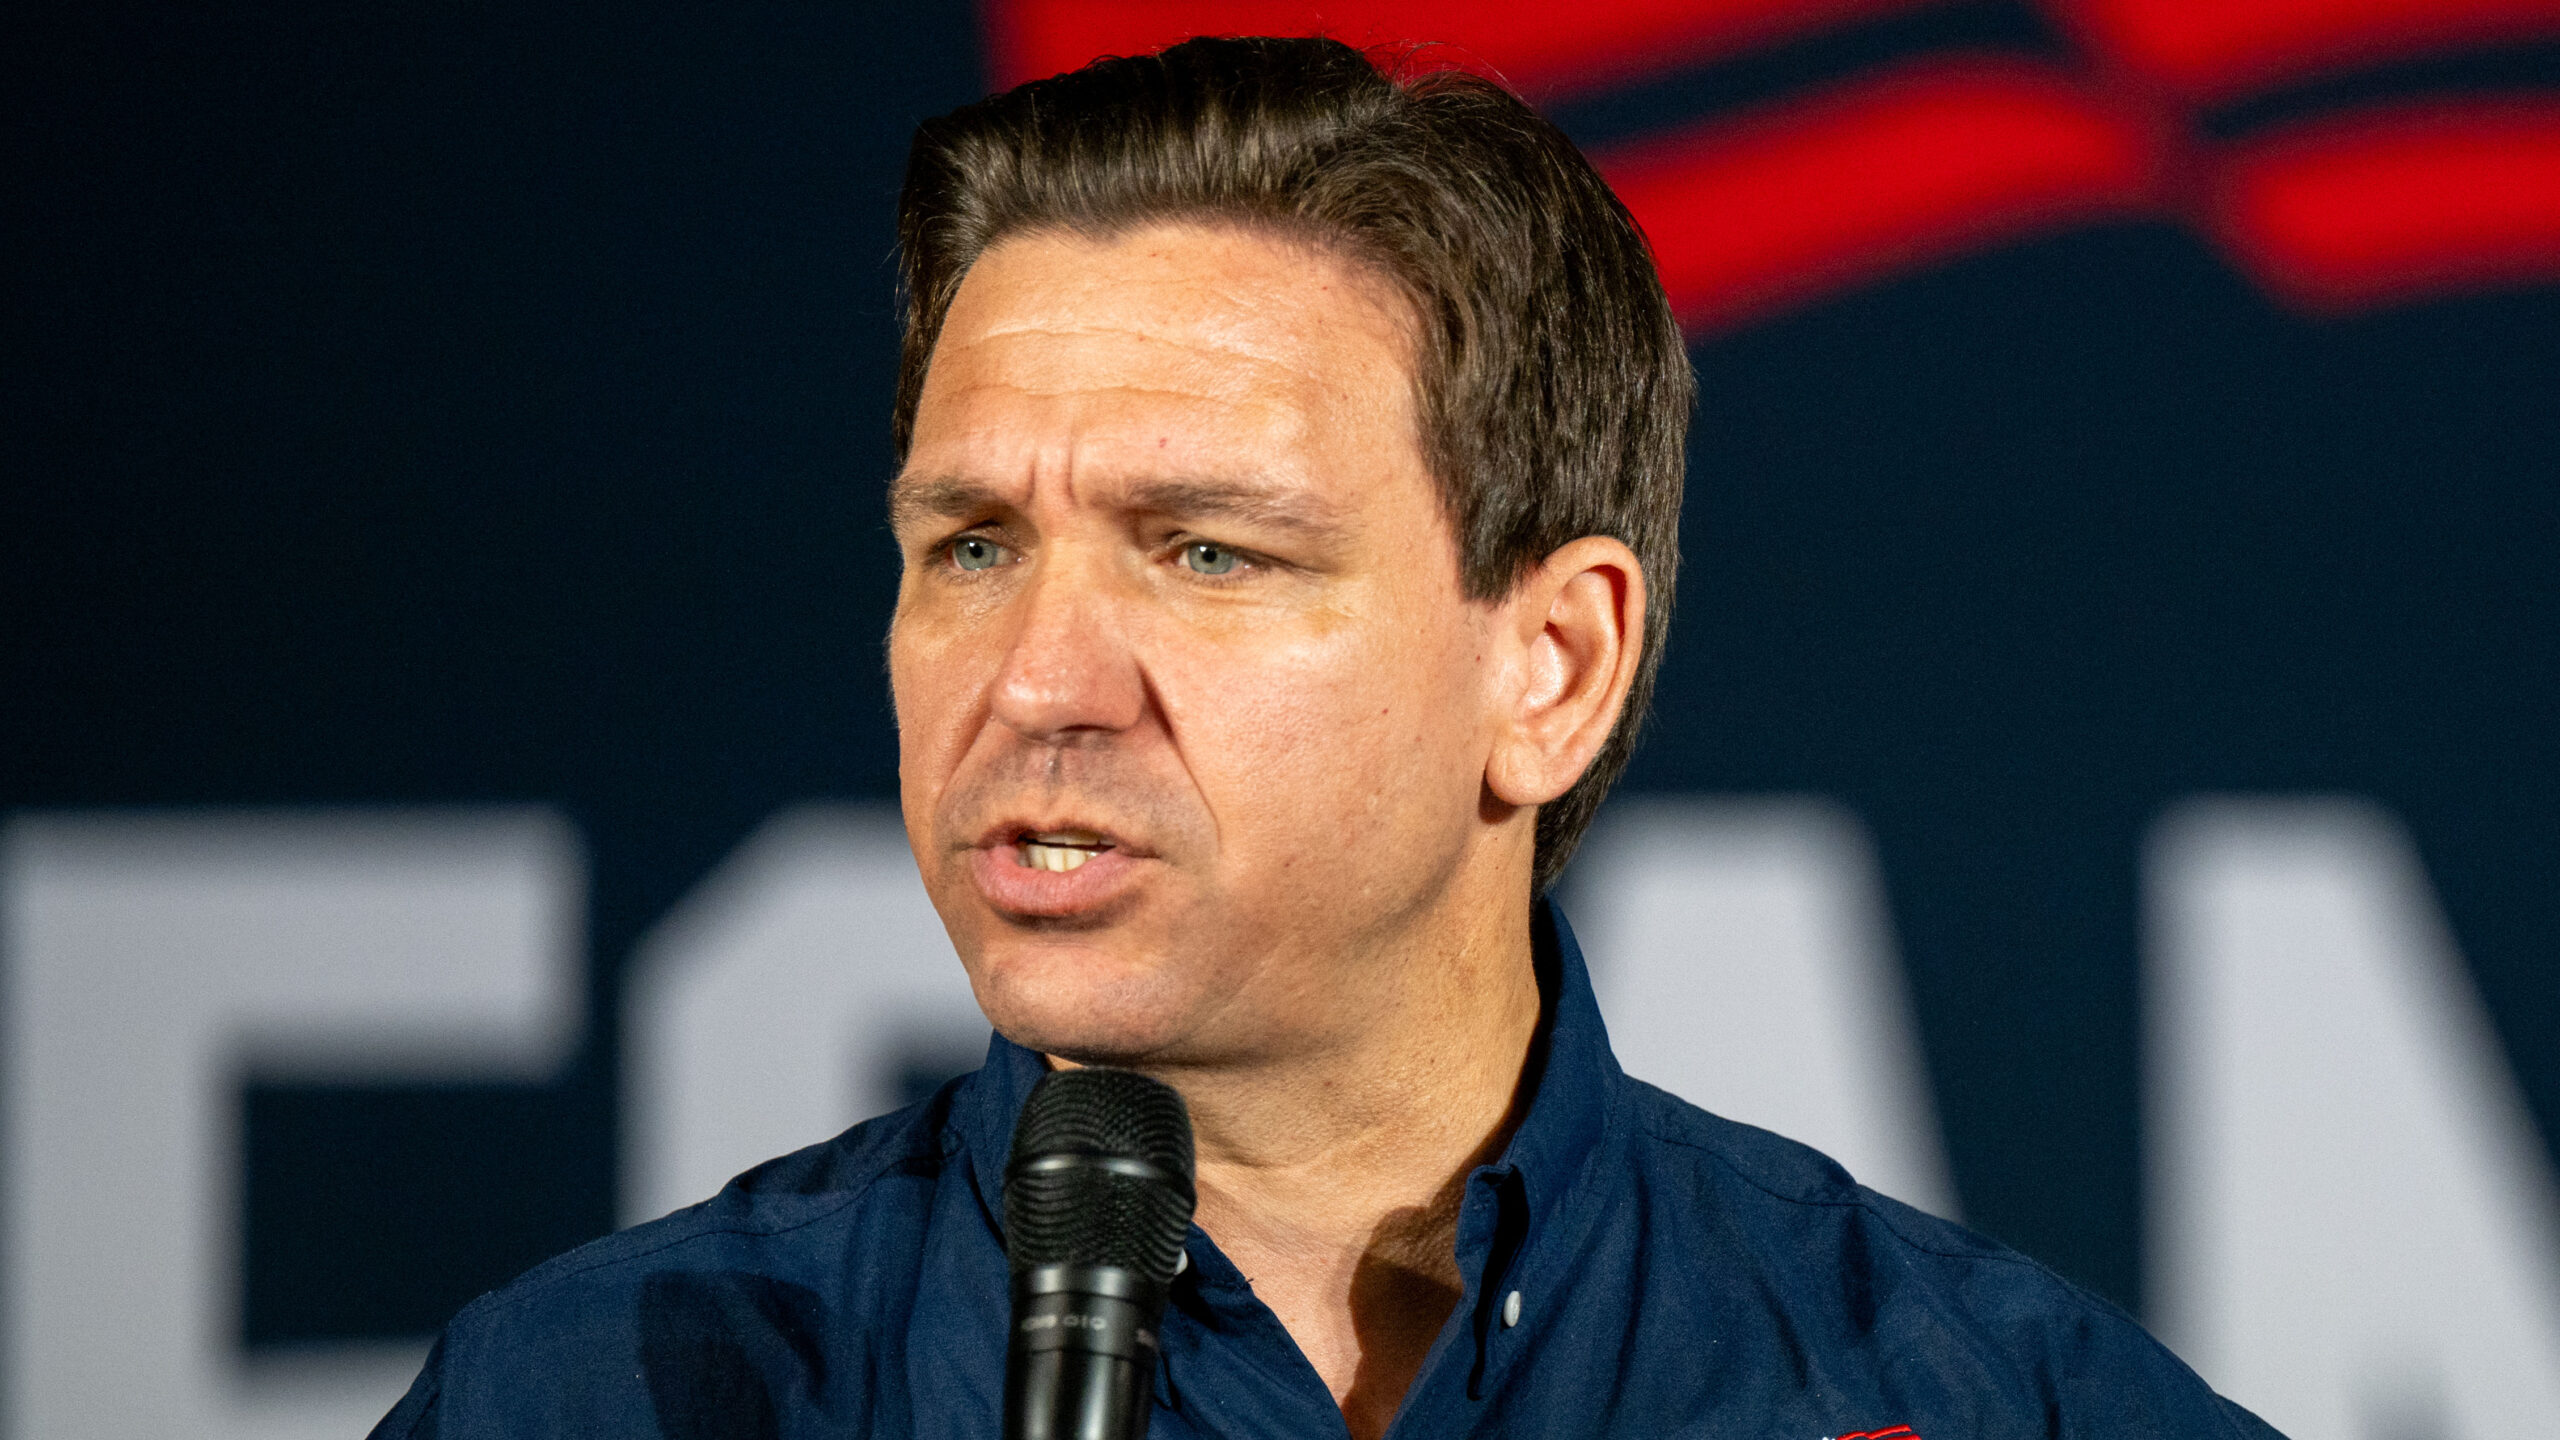 Disney requests lawsuit against DeSantis to commence at GOP Convention, citing potential election interference.